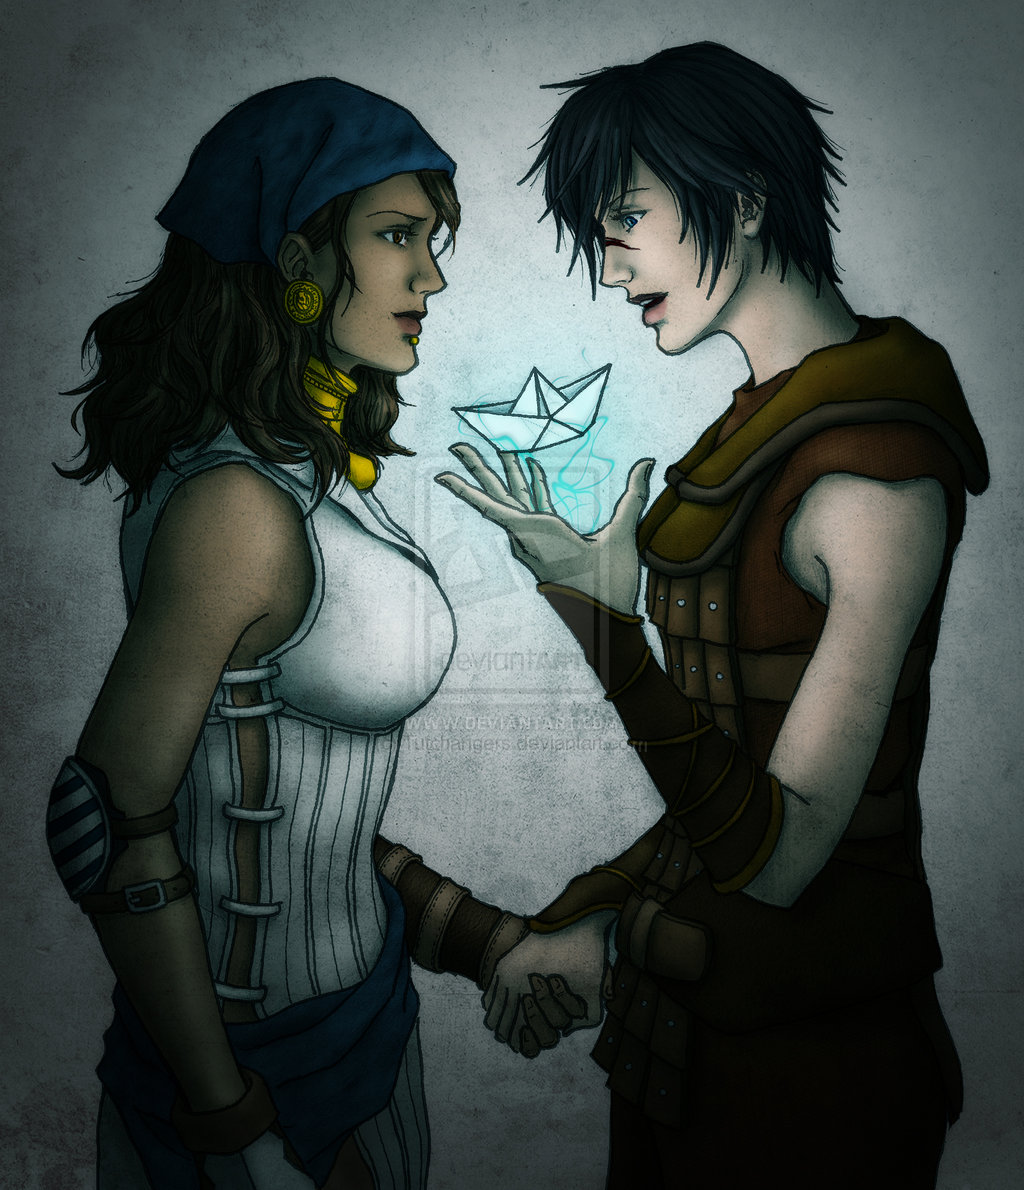 another_ship_for_isabela_by_tutchangers-d3hiaun